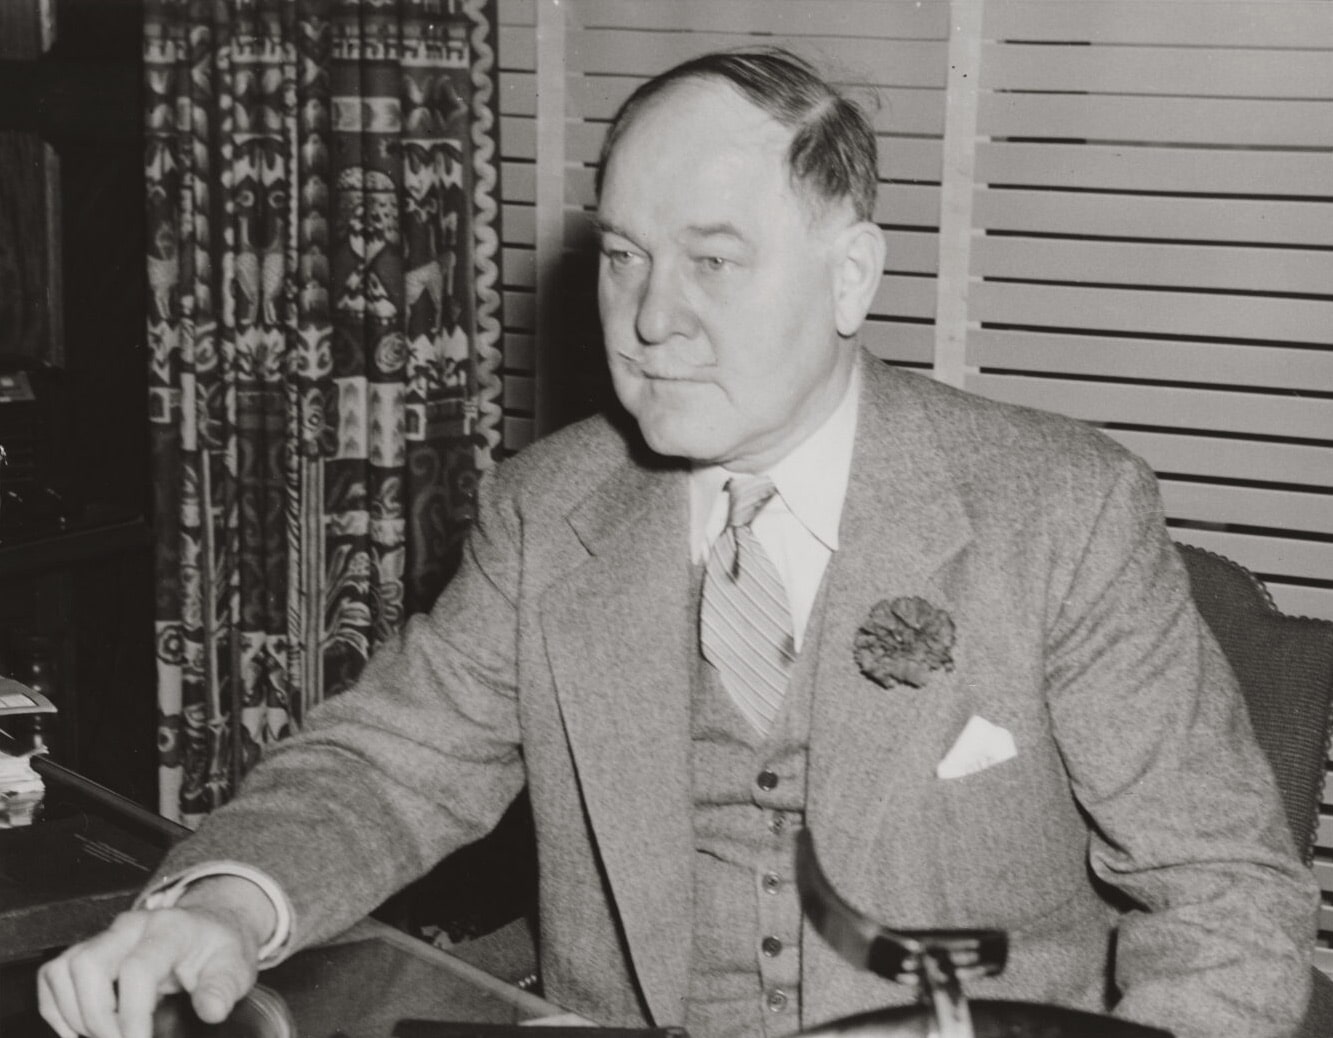 Charles Horn, who purchased the remnants of the original Federal Cartridge Company in 1922